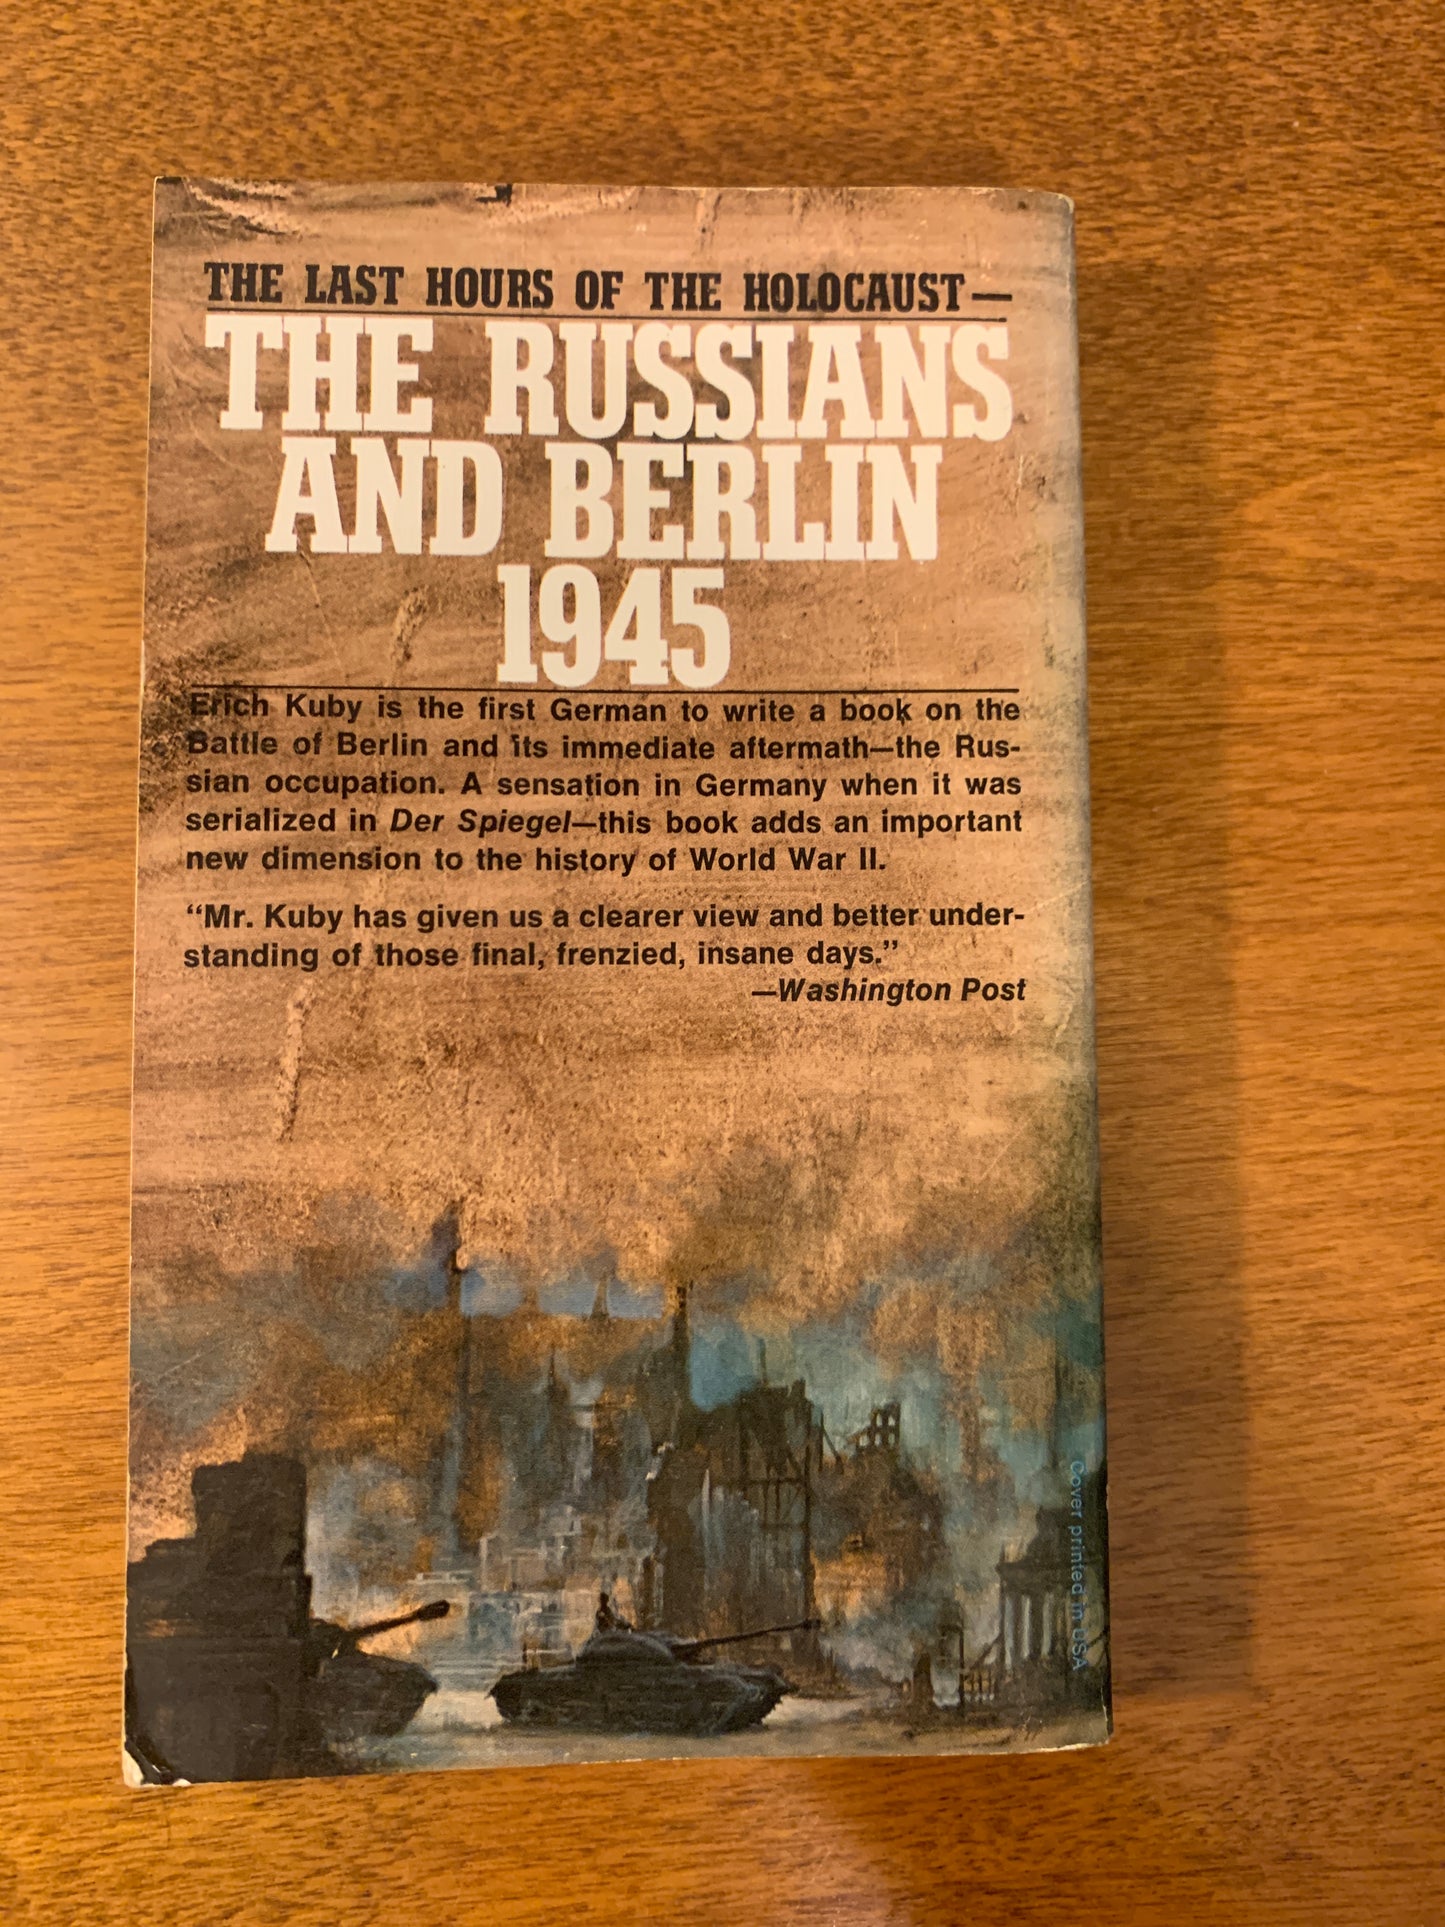 The Russians and Berlin 1945 by Erich Kuby, 1969